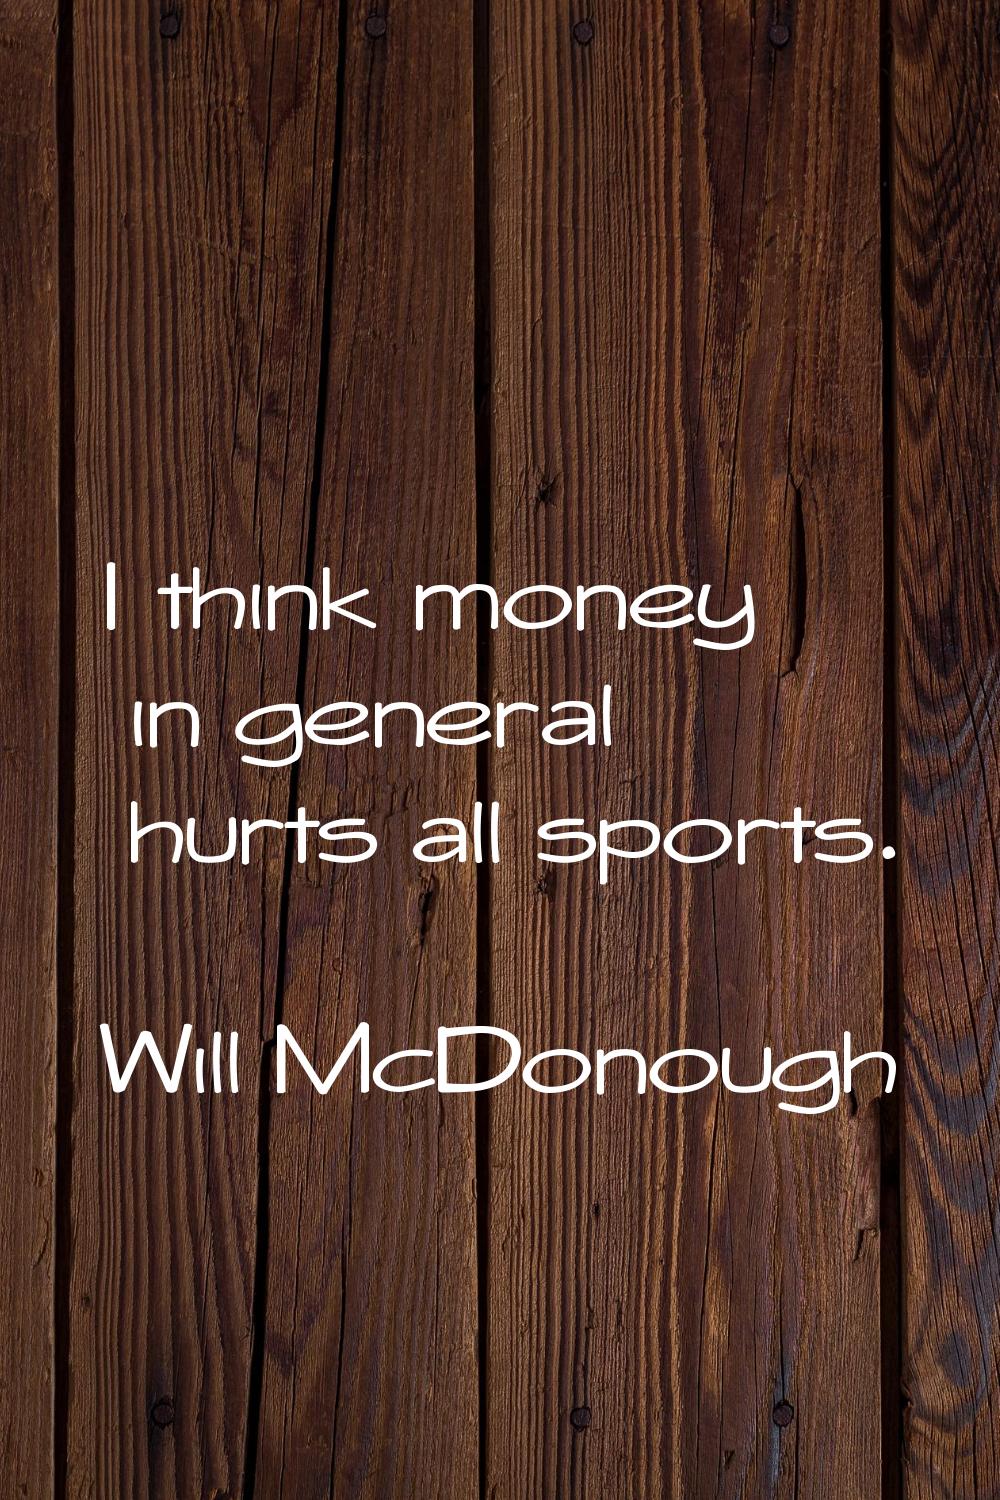 I think money in general hurts all sports.